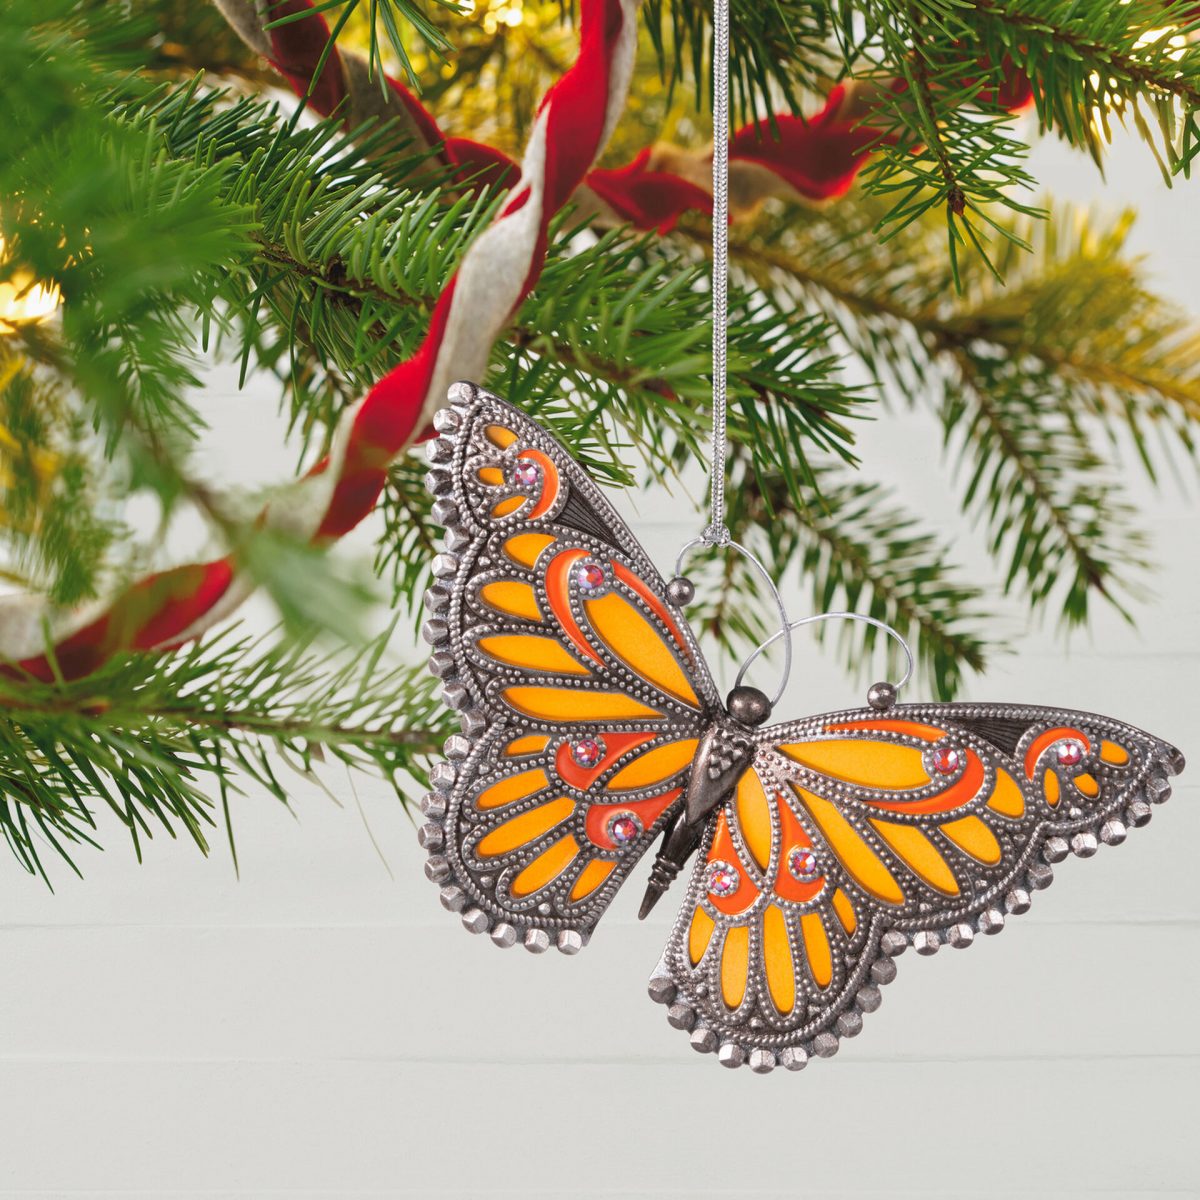 Brilliant Butterflies 2020 Ornament Occasions Hallmark Gifts and More